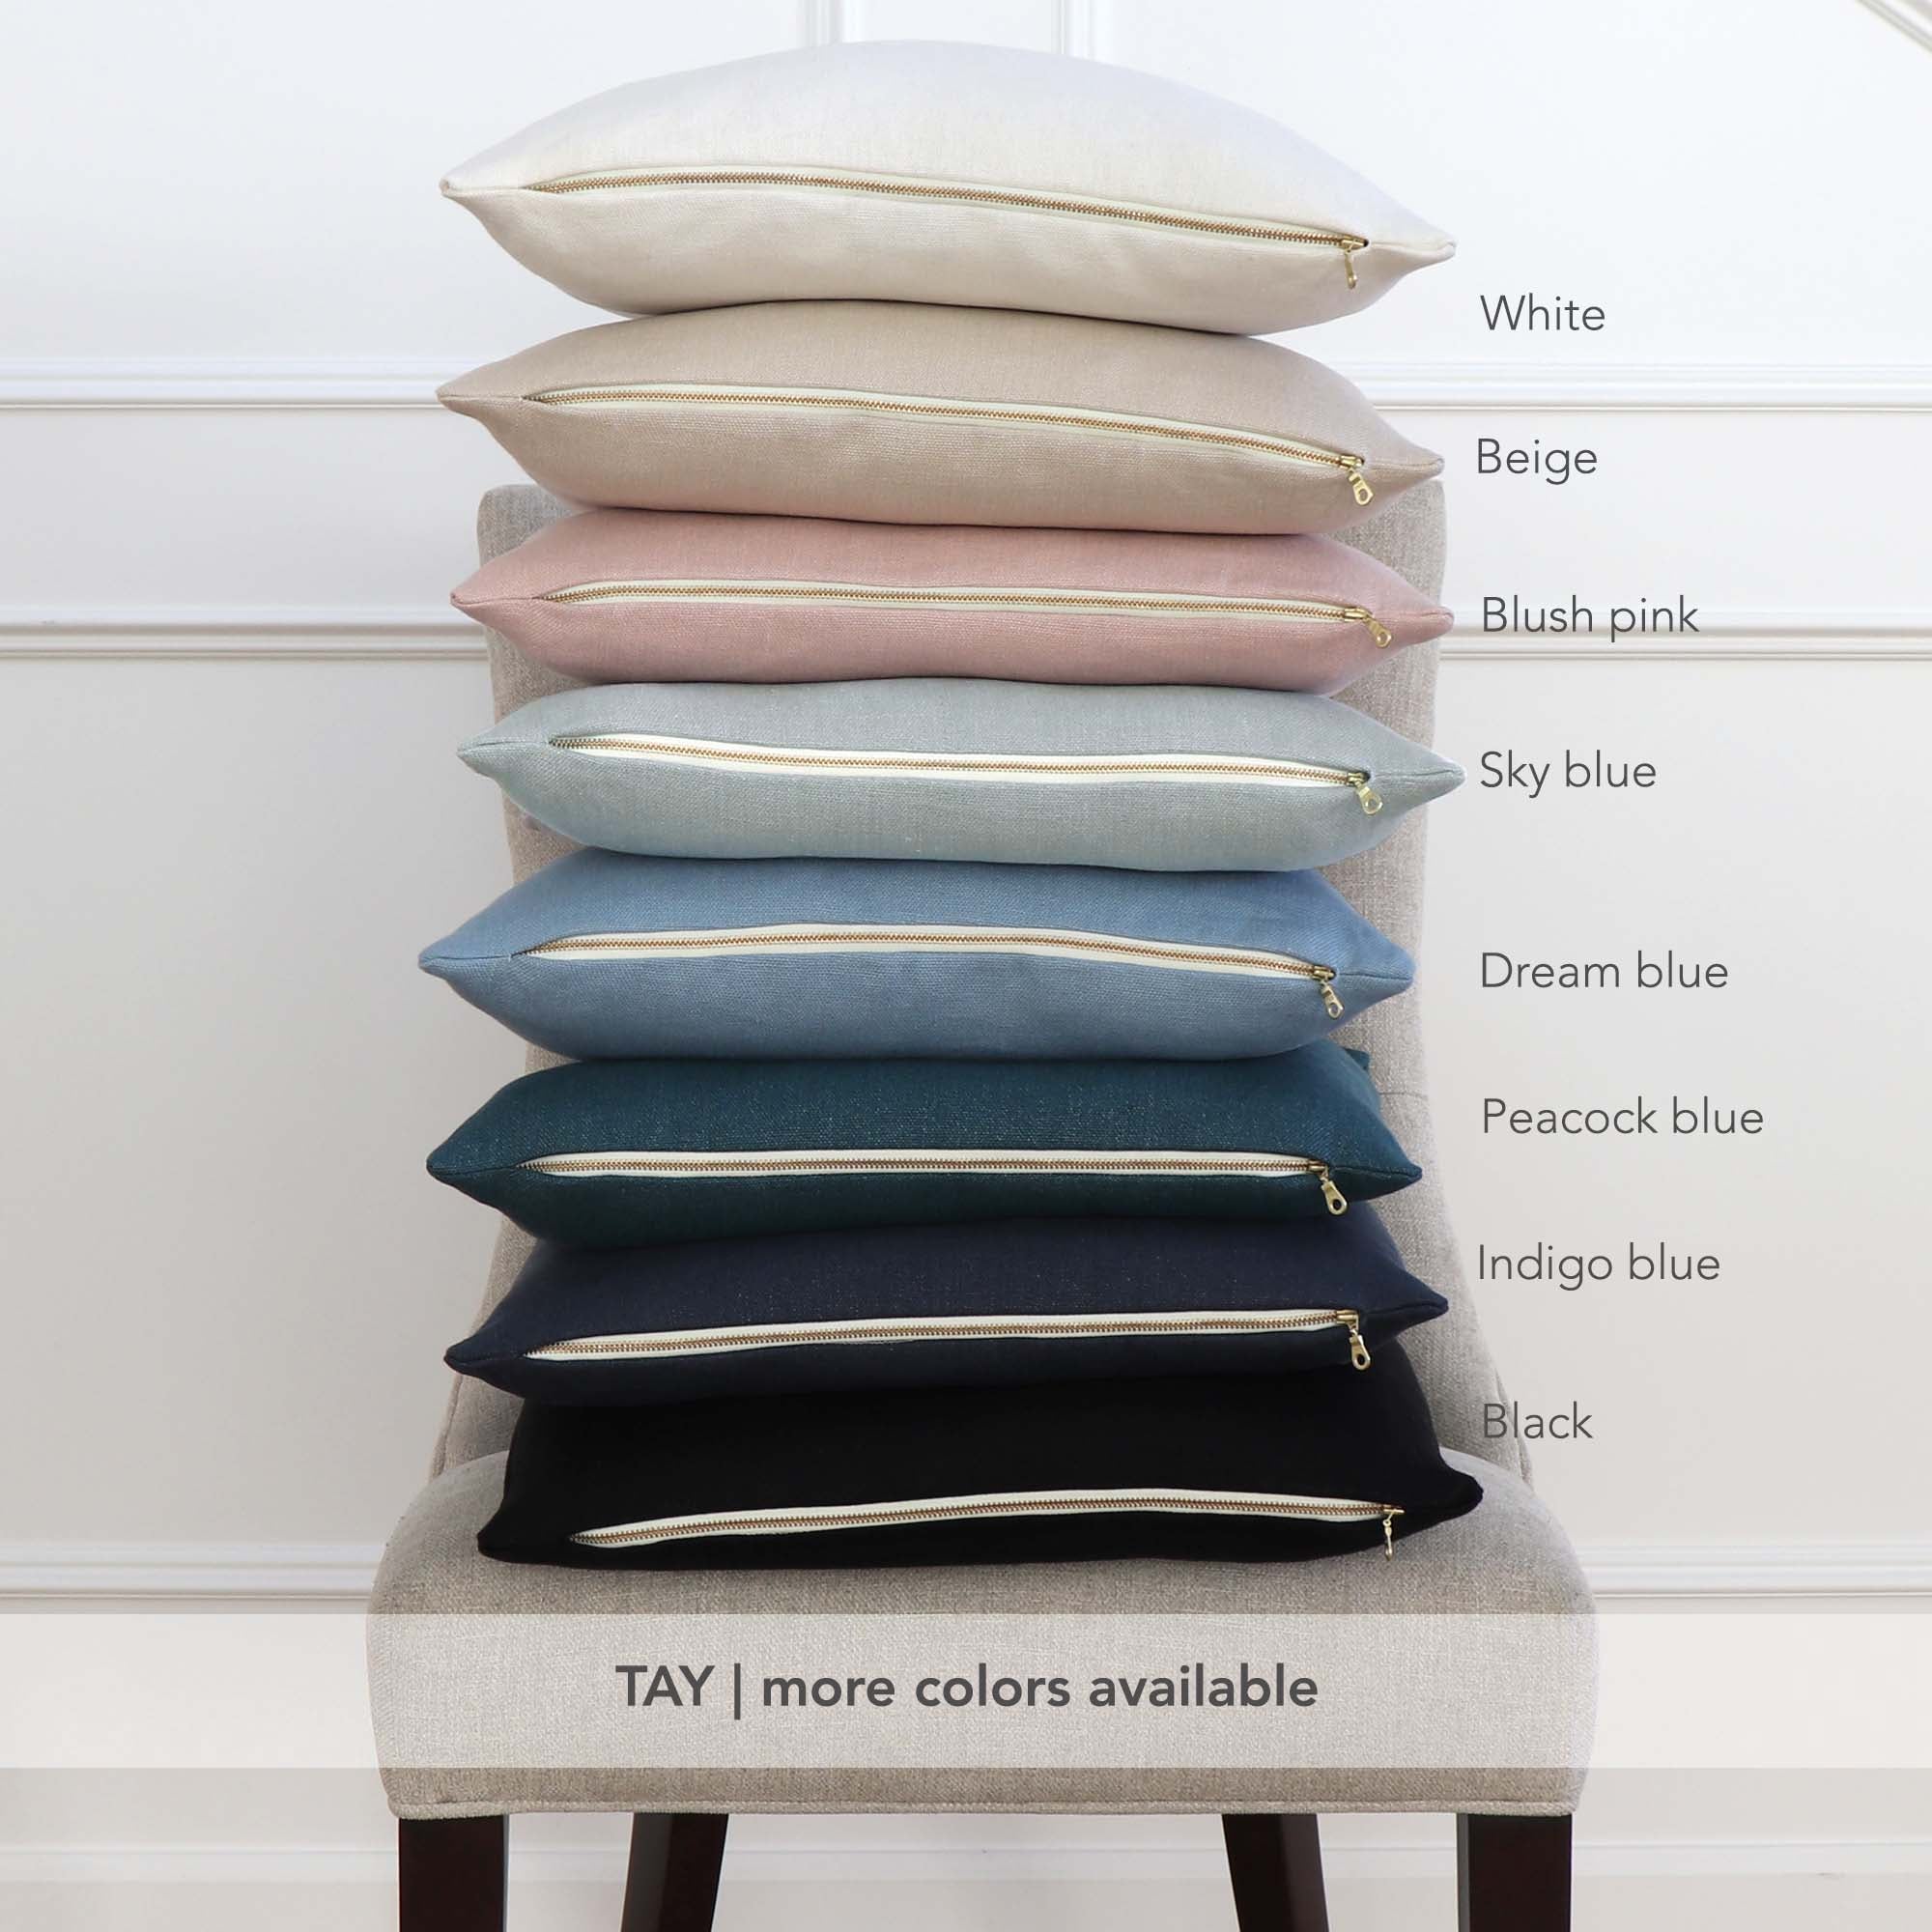 Tay Linen Pillow Covers in More Colors